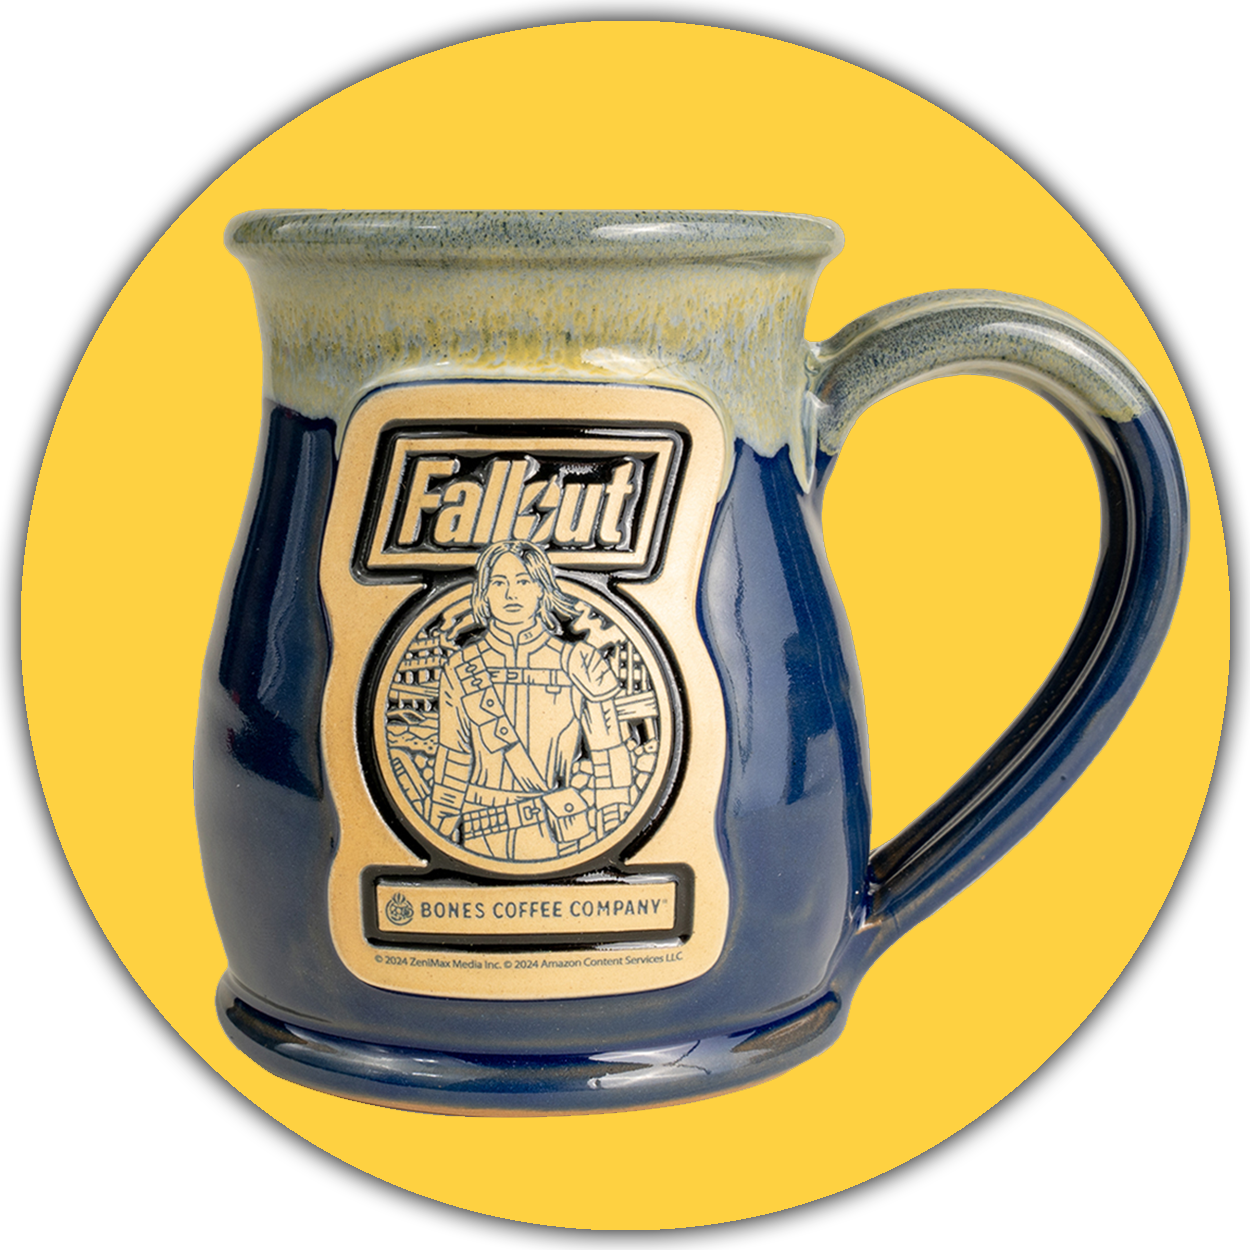 The front of the Bones Coffee Company Lucy hand thrown mug with the Atomic Apple art on the golden medallion. It is inspired by Zenimax and Amazon’s Fallout show. The mug is powder blue colored with a white and yellow glaze on top. A yellow circle is behind it.